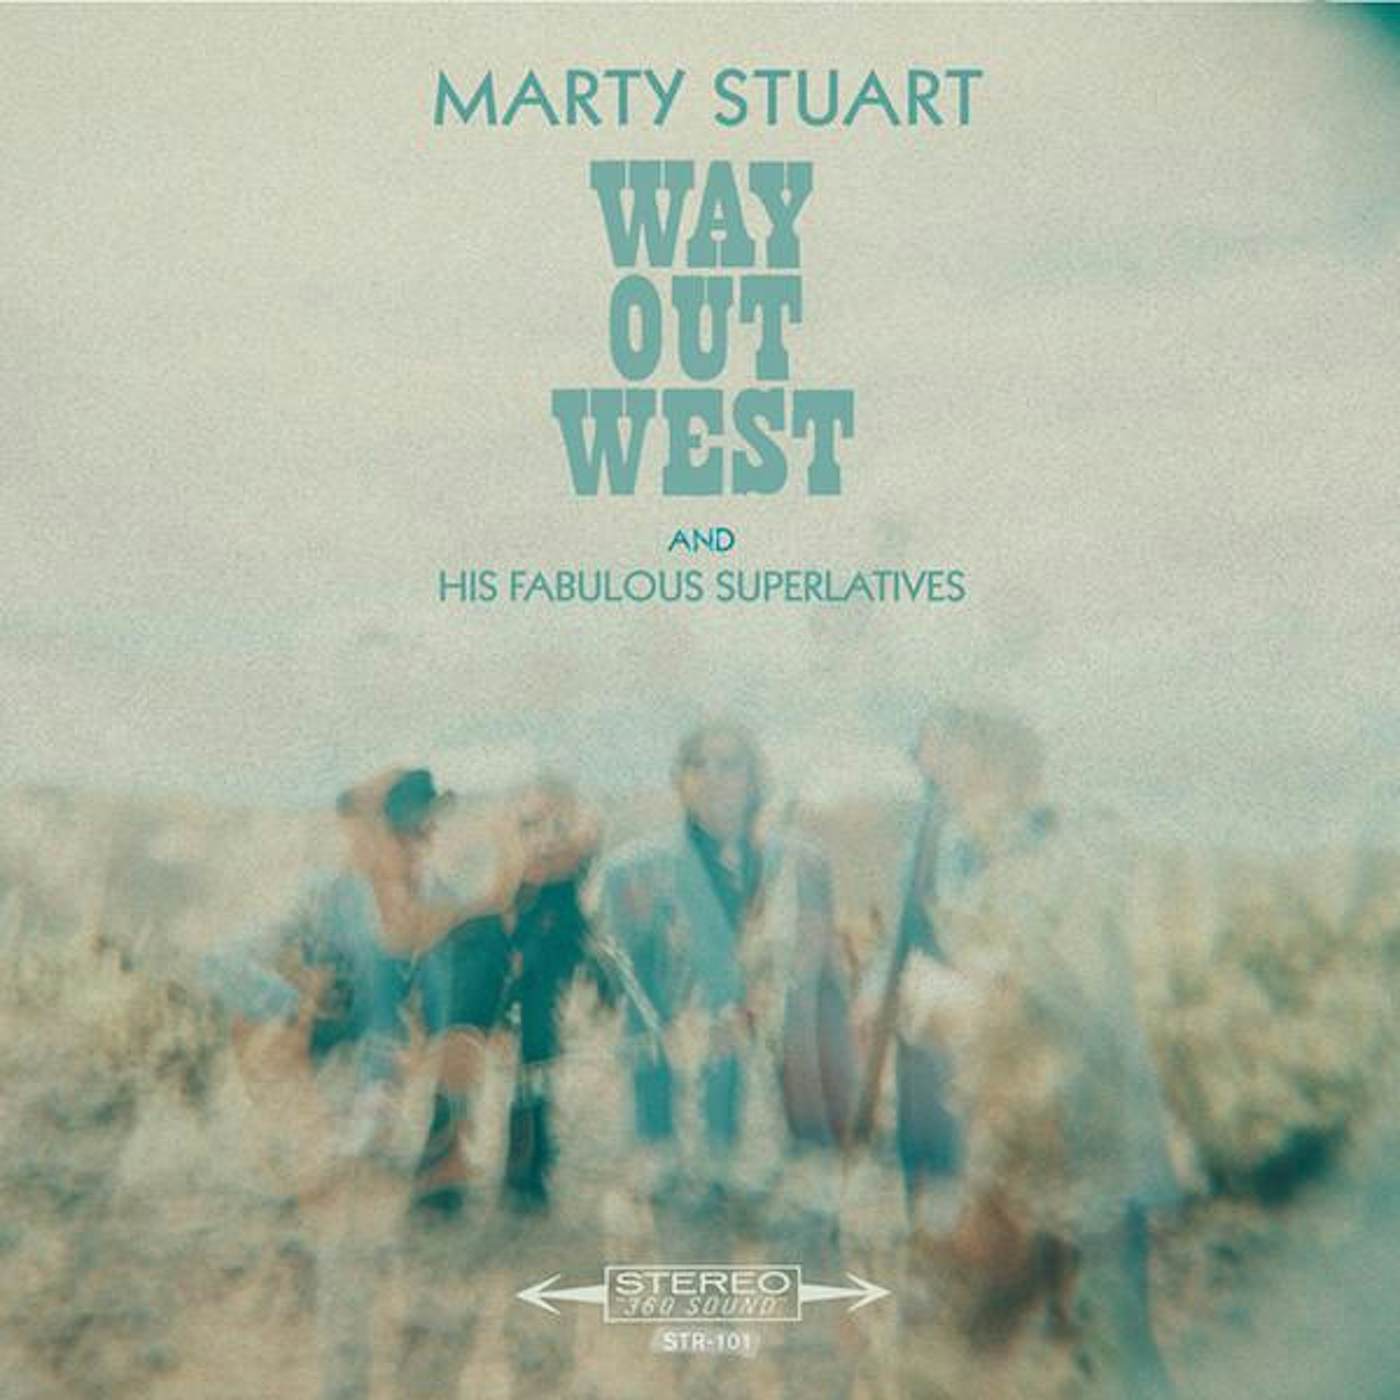 Marty Stuart And His Fabulous Superlatives Way Out West Vinyl Record